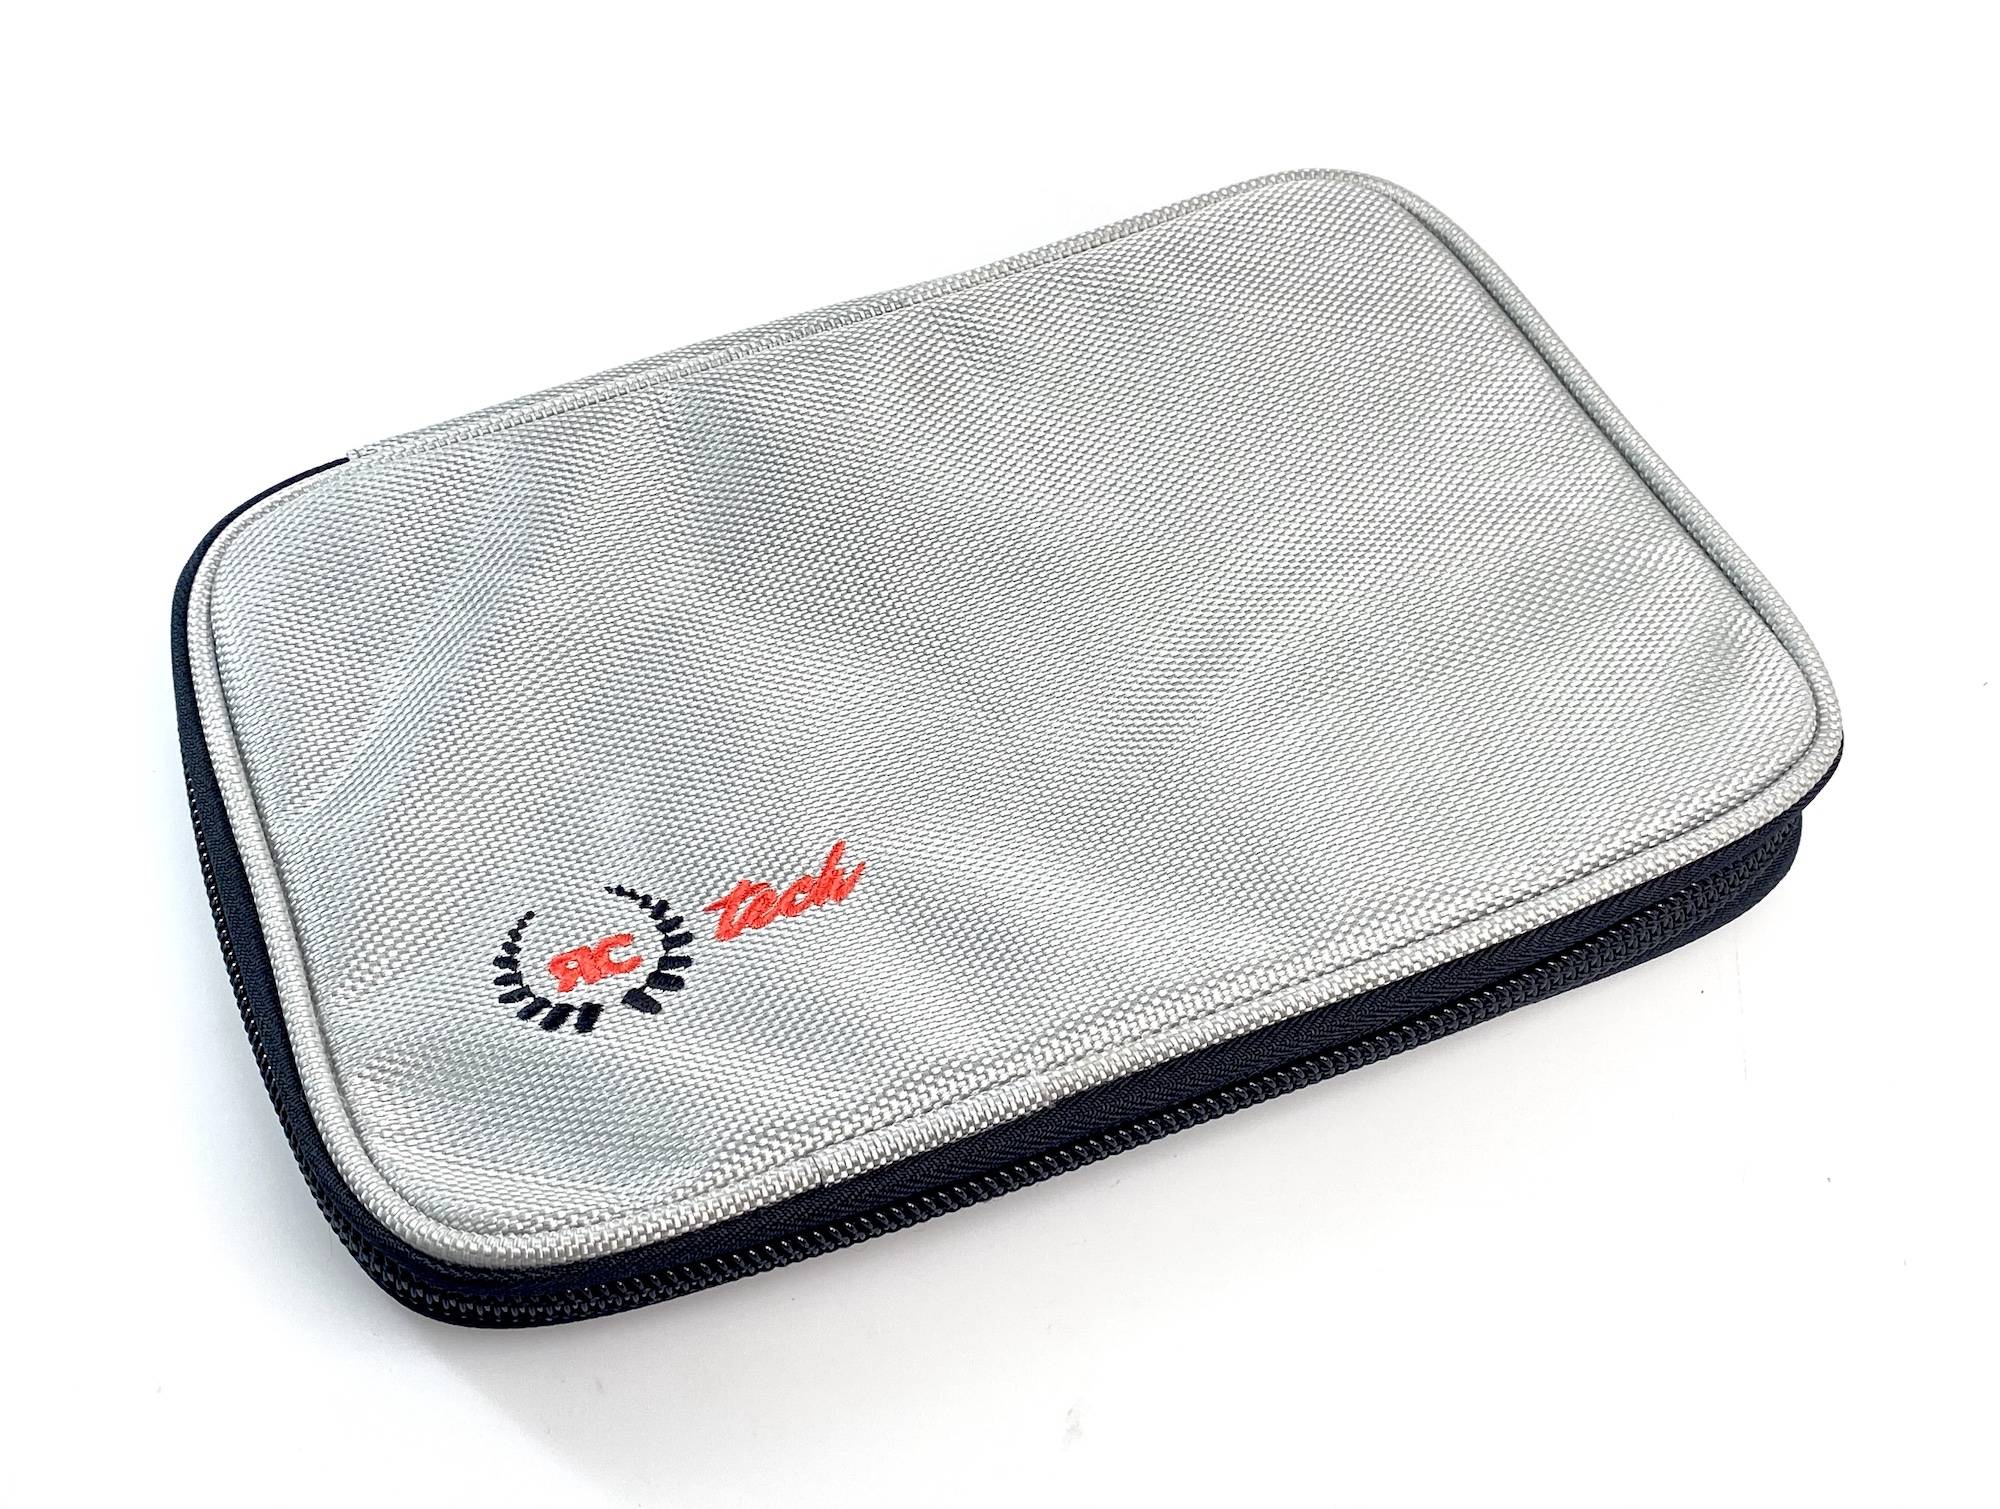 Hard Cover Pistol Bag by RC Tech